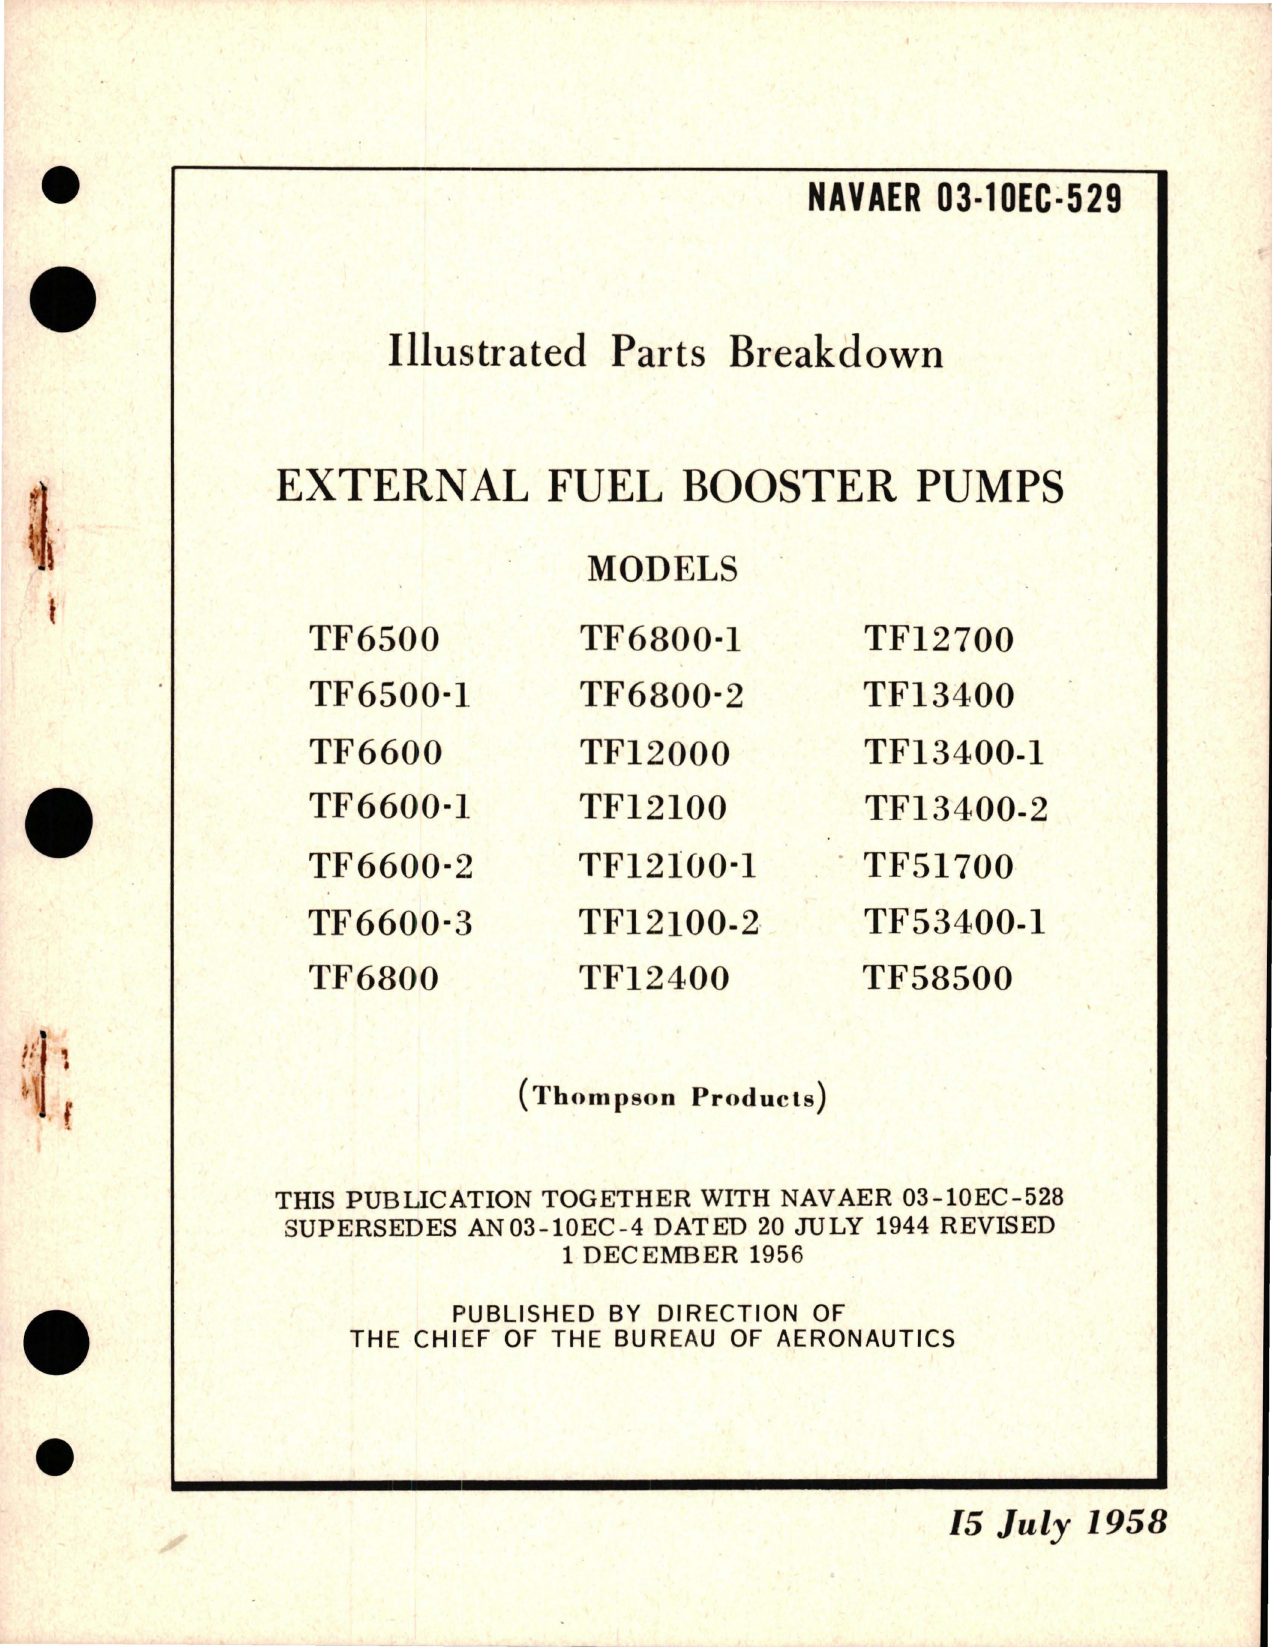 Sample page 1 from AirCorps Library document: Illustrated Parts Breakdown for External Fuel Booster Pumps